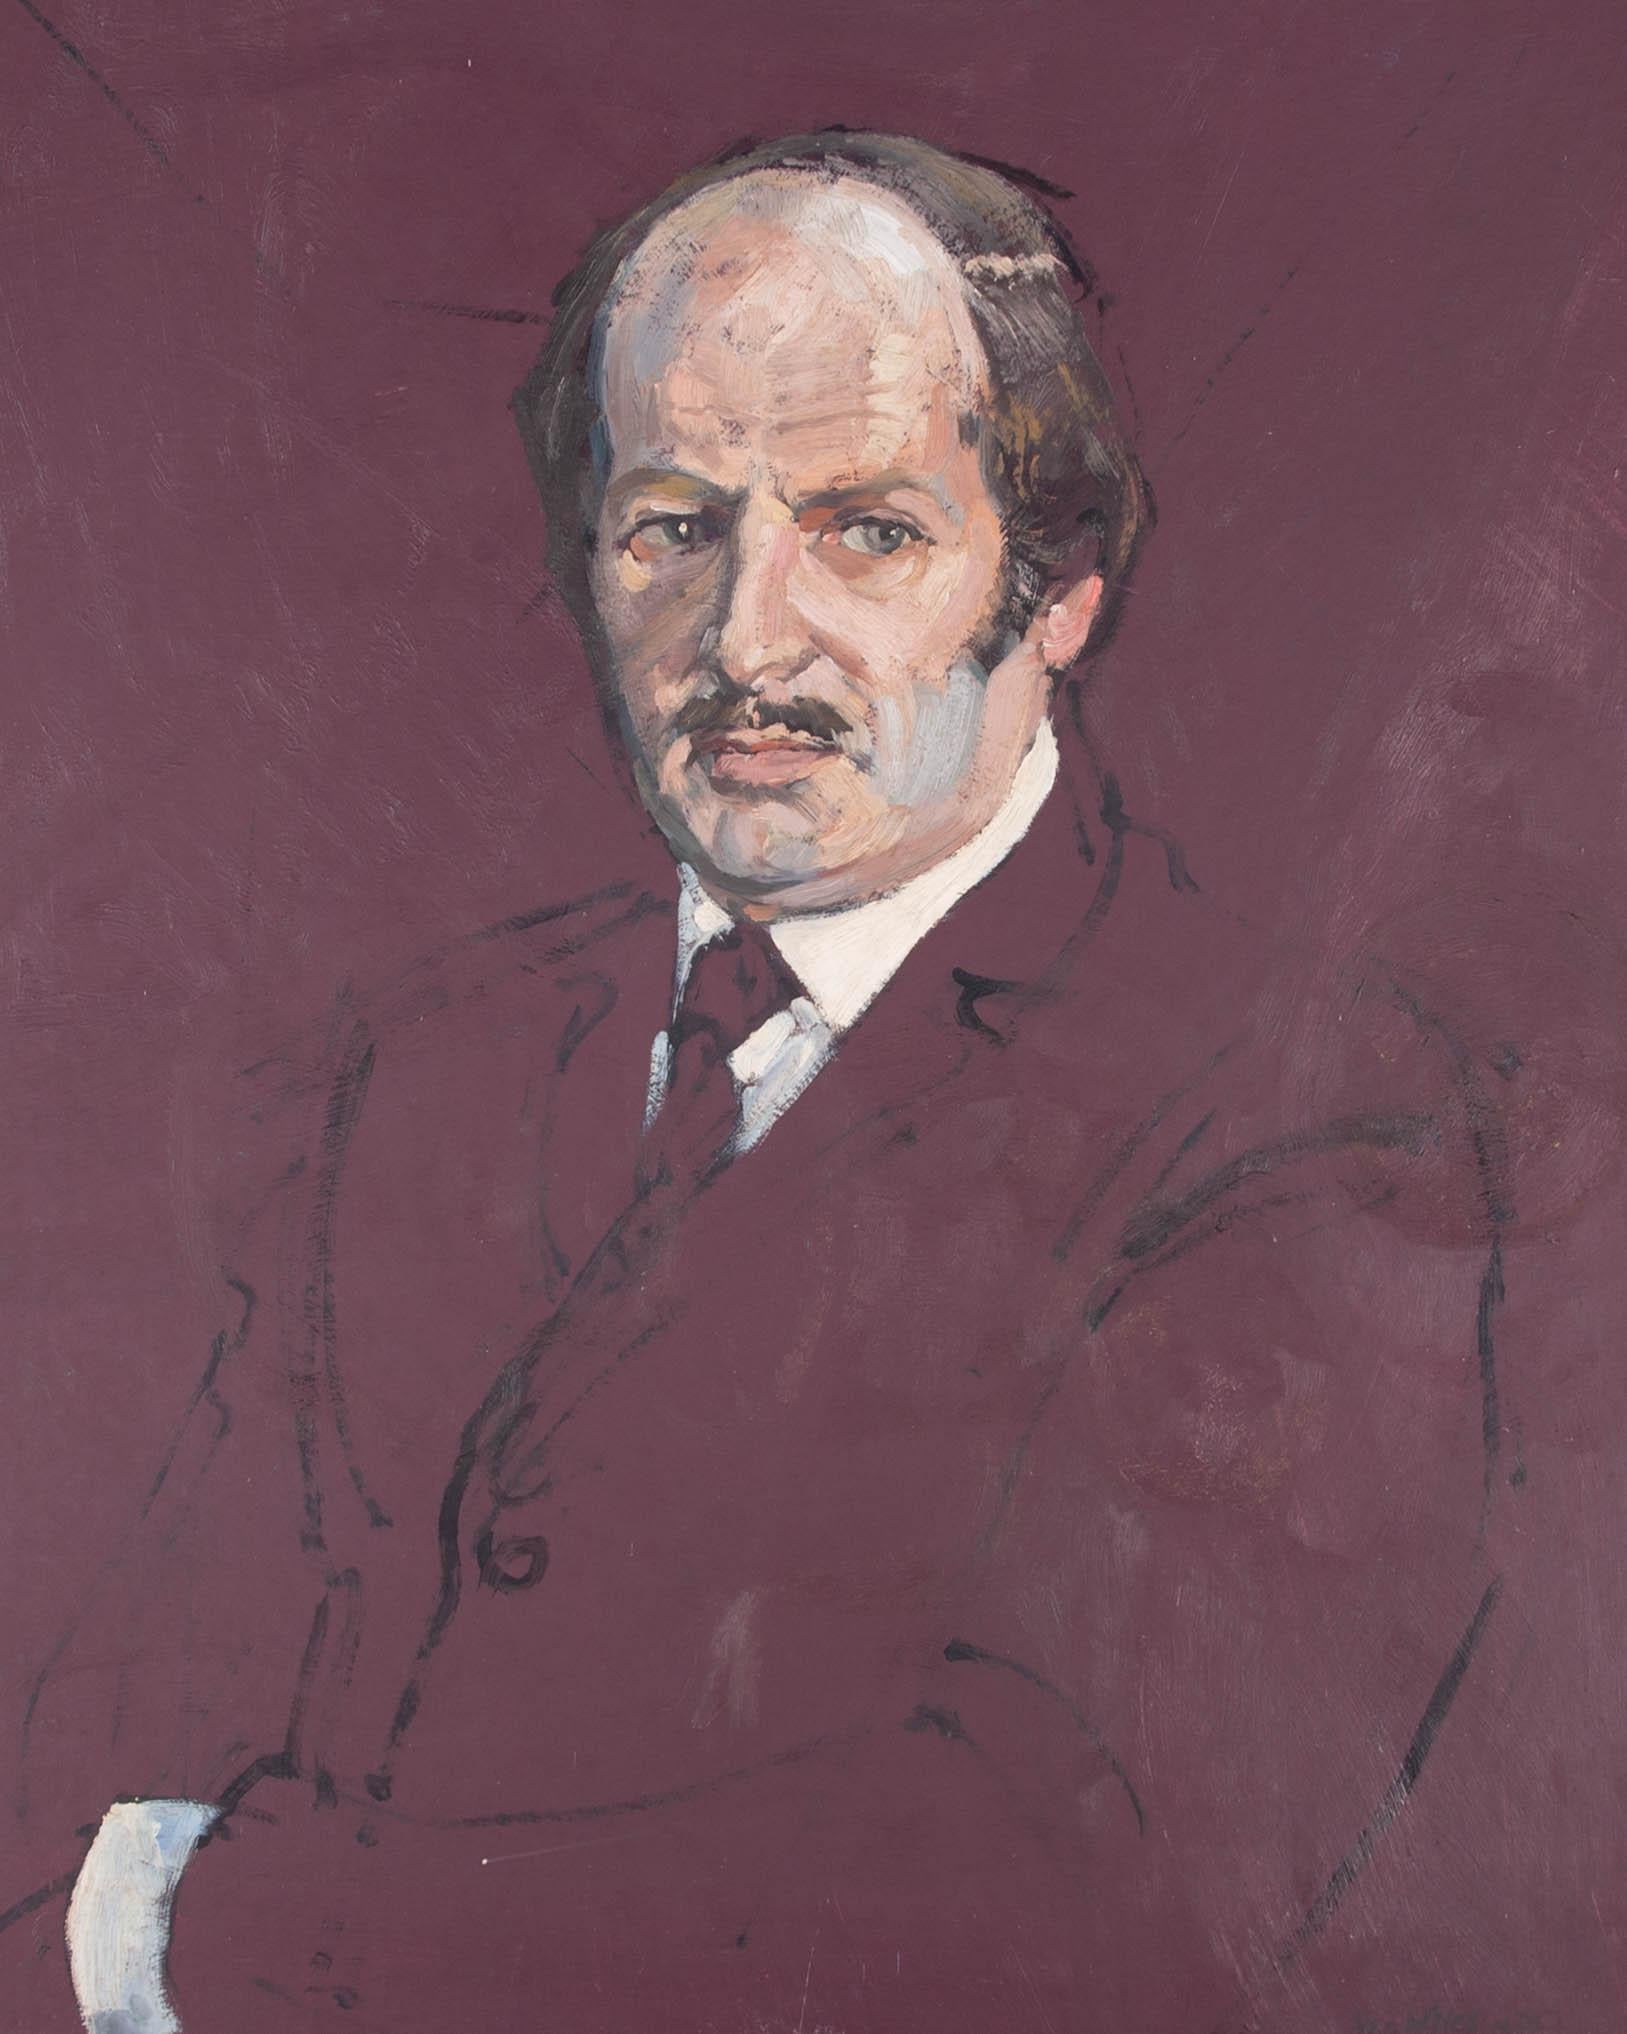 This charming portrait depicts a stern looking man staring into the distance. His burgundy suit blends into the burgundy background, bringing out the colour in his face and the stark whiteness of his shirt. Painted in gestural, loose brushstrokes